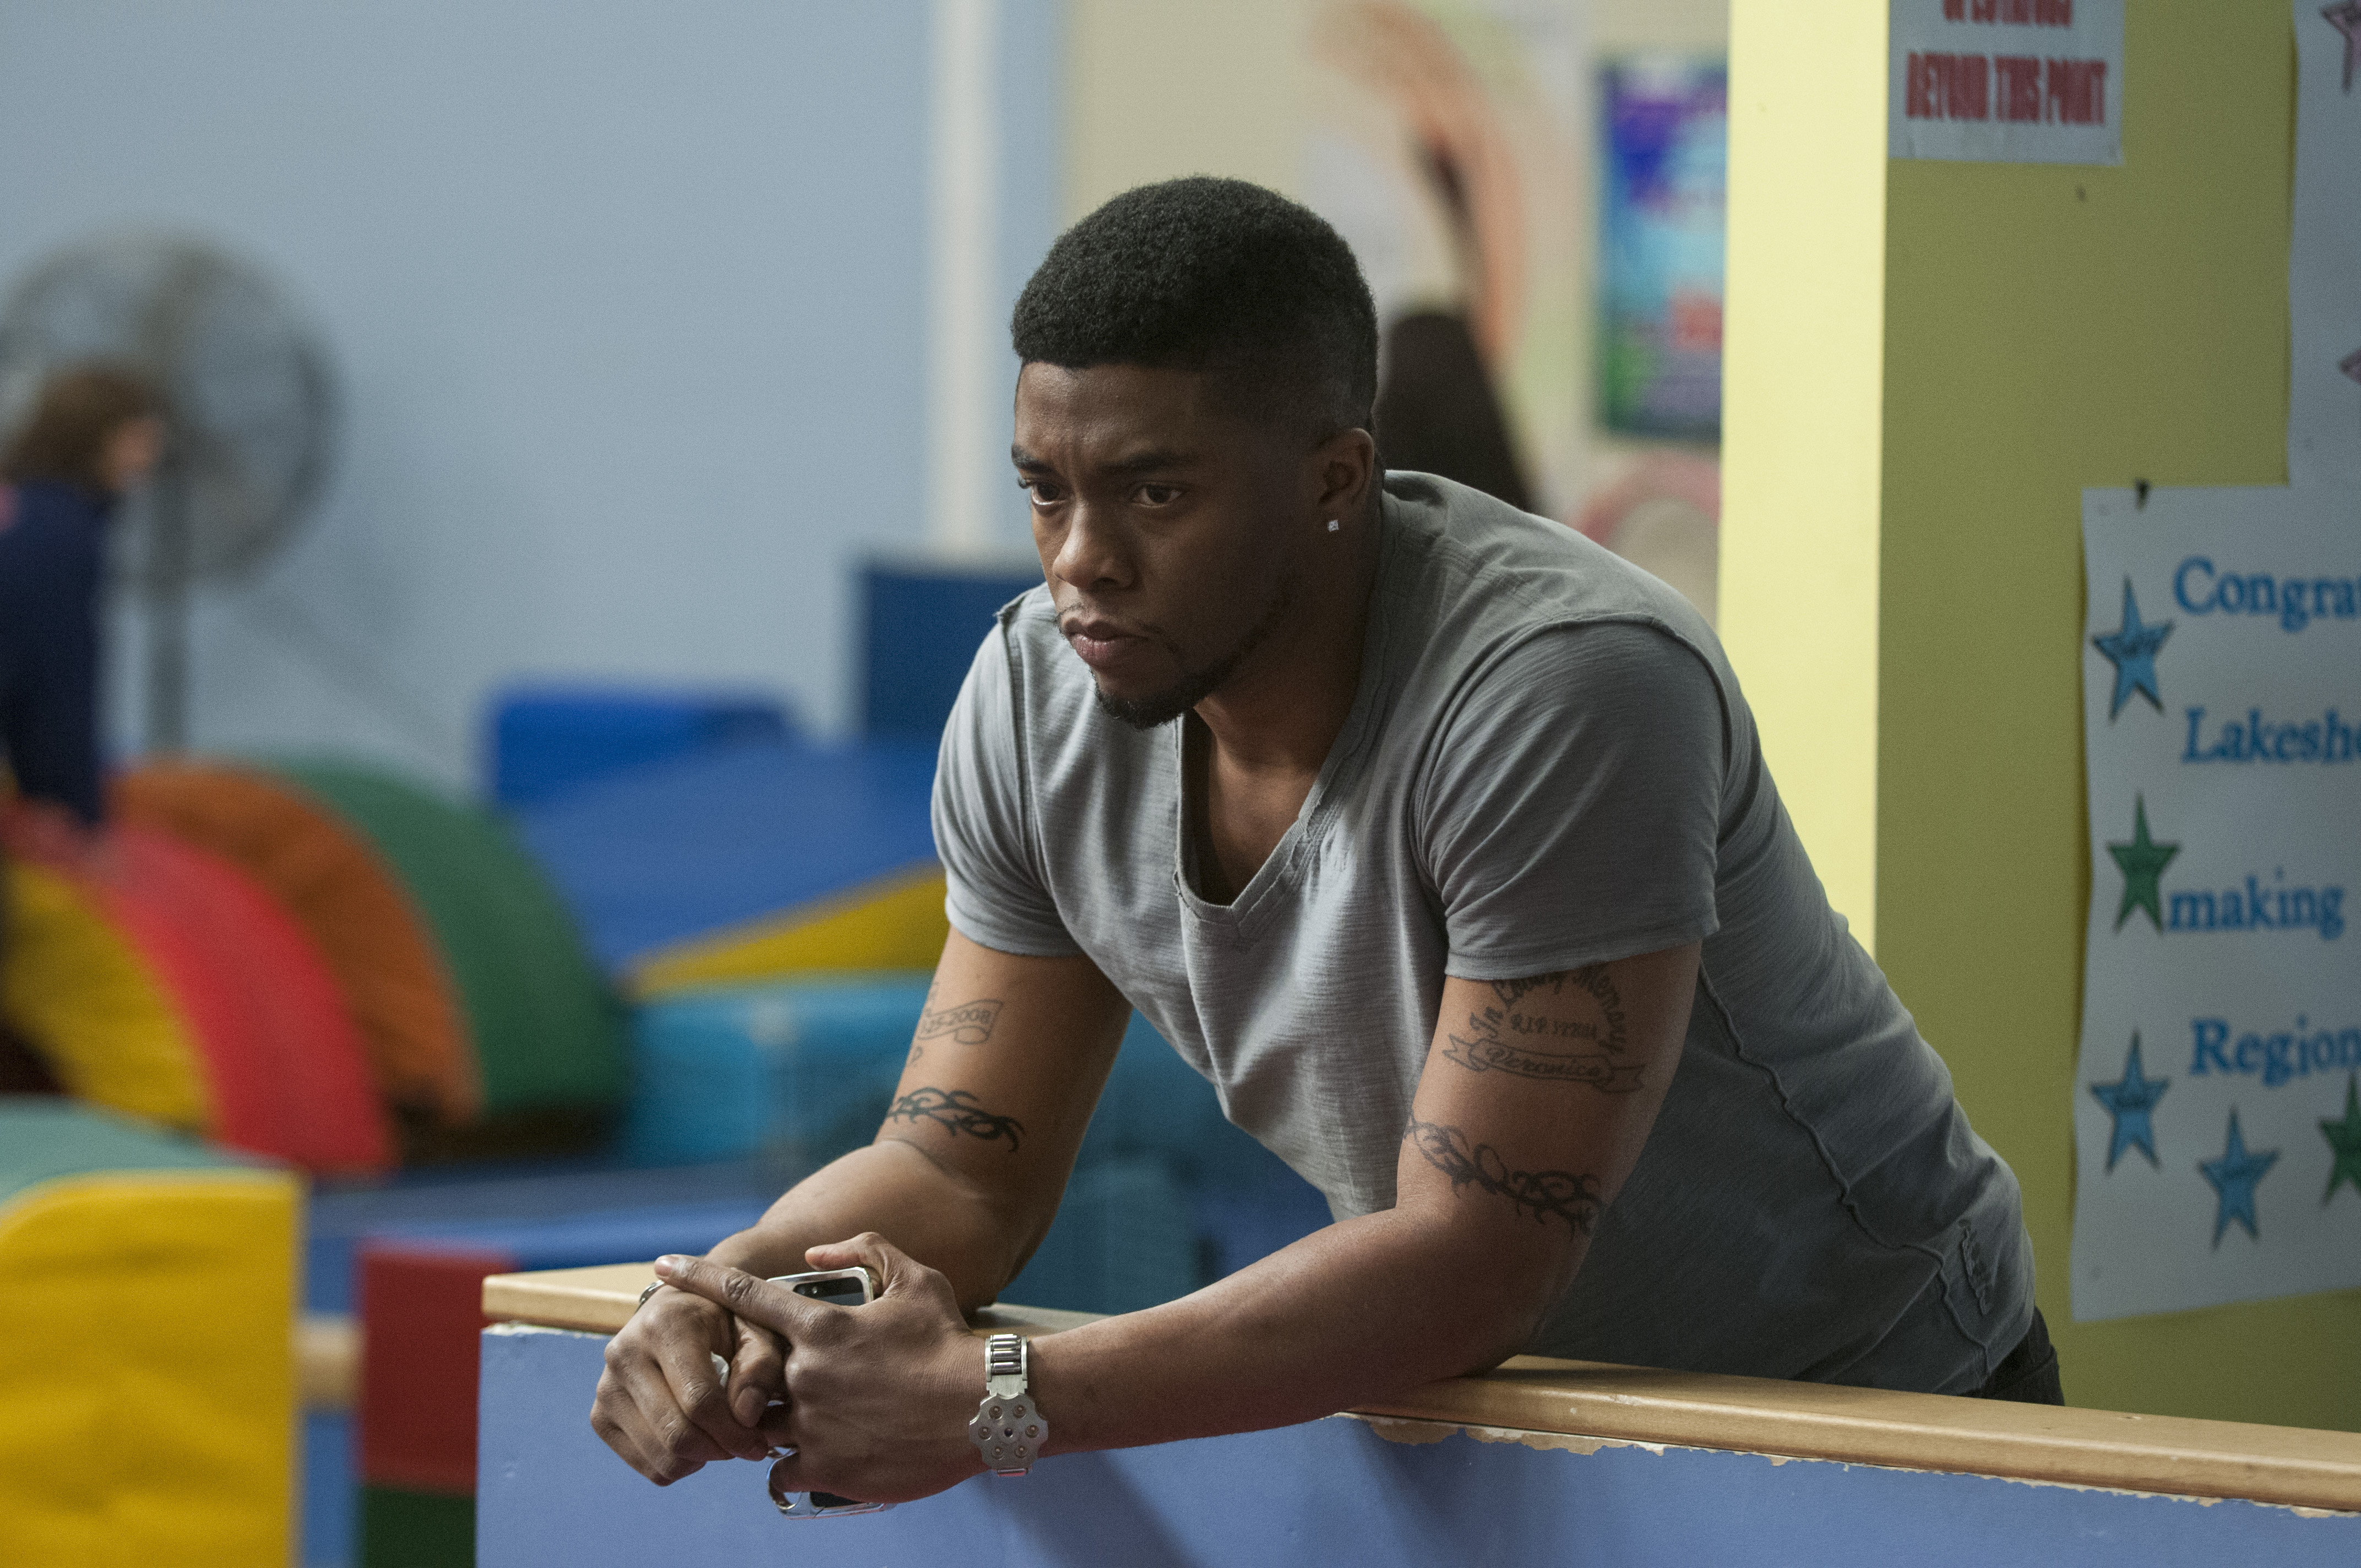 Chadwick Boseman was once a Cleveland Brown in 'Draft Day